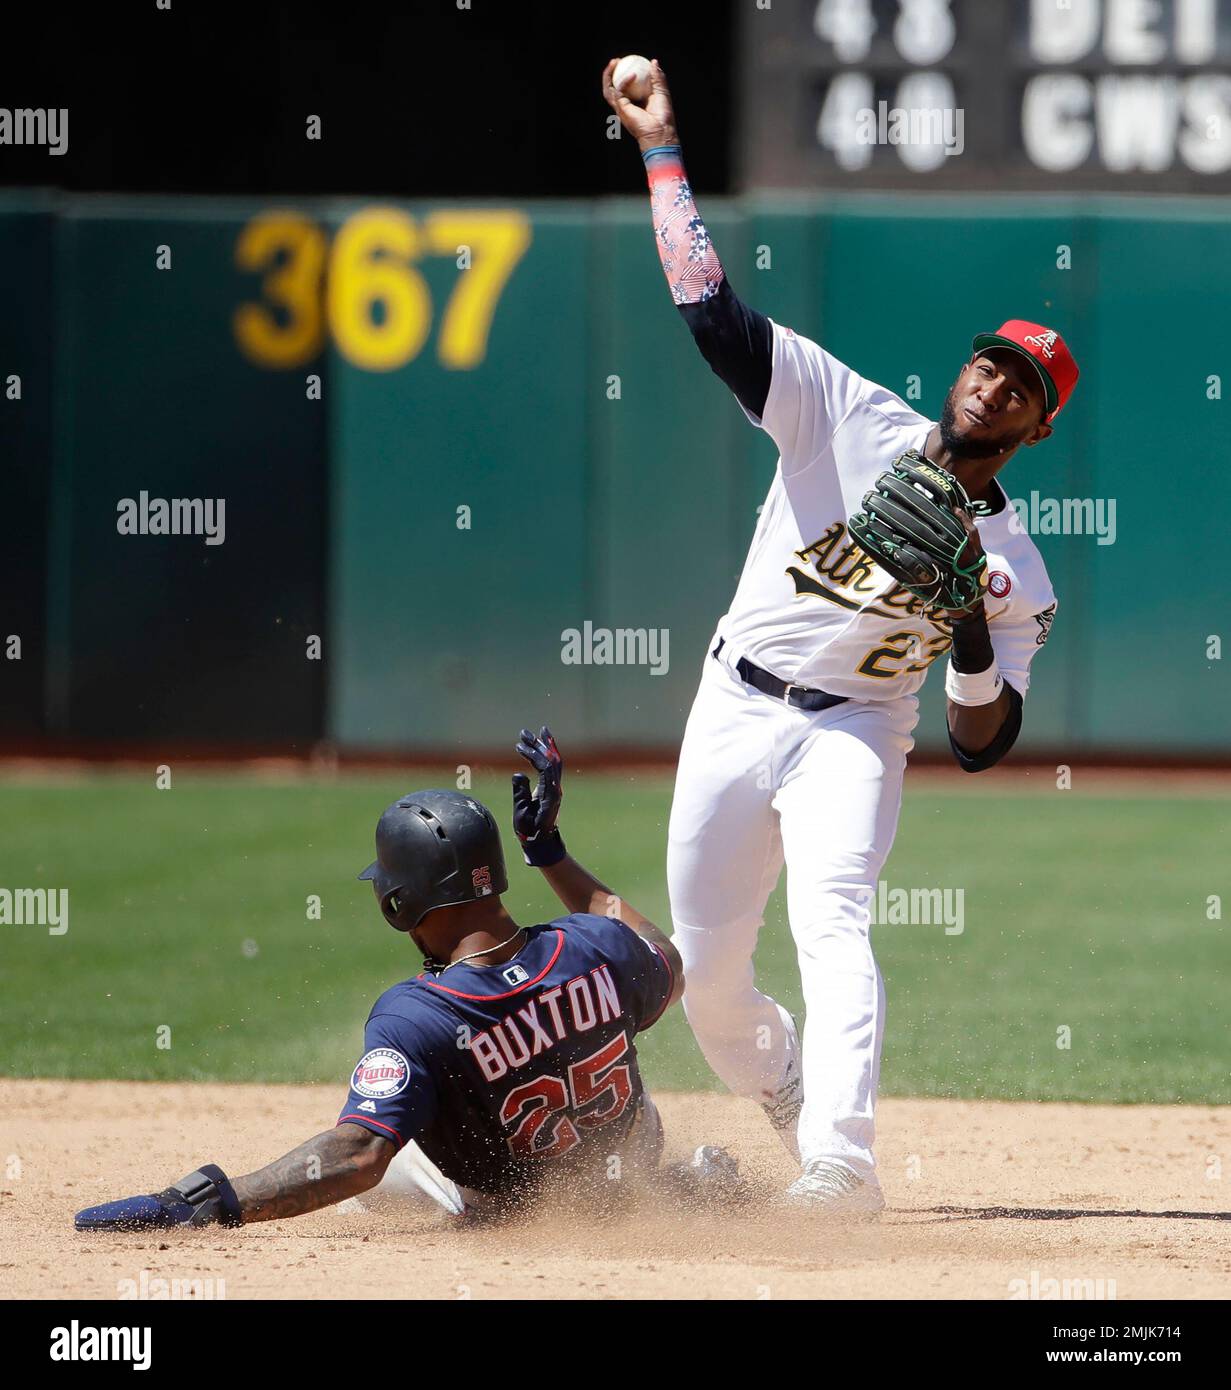 Why new A's second baseman Jurickson Profar 'could be really special